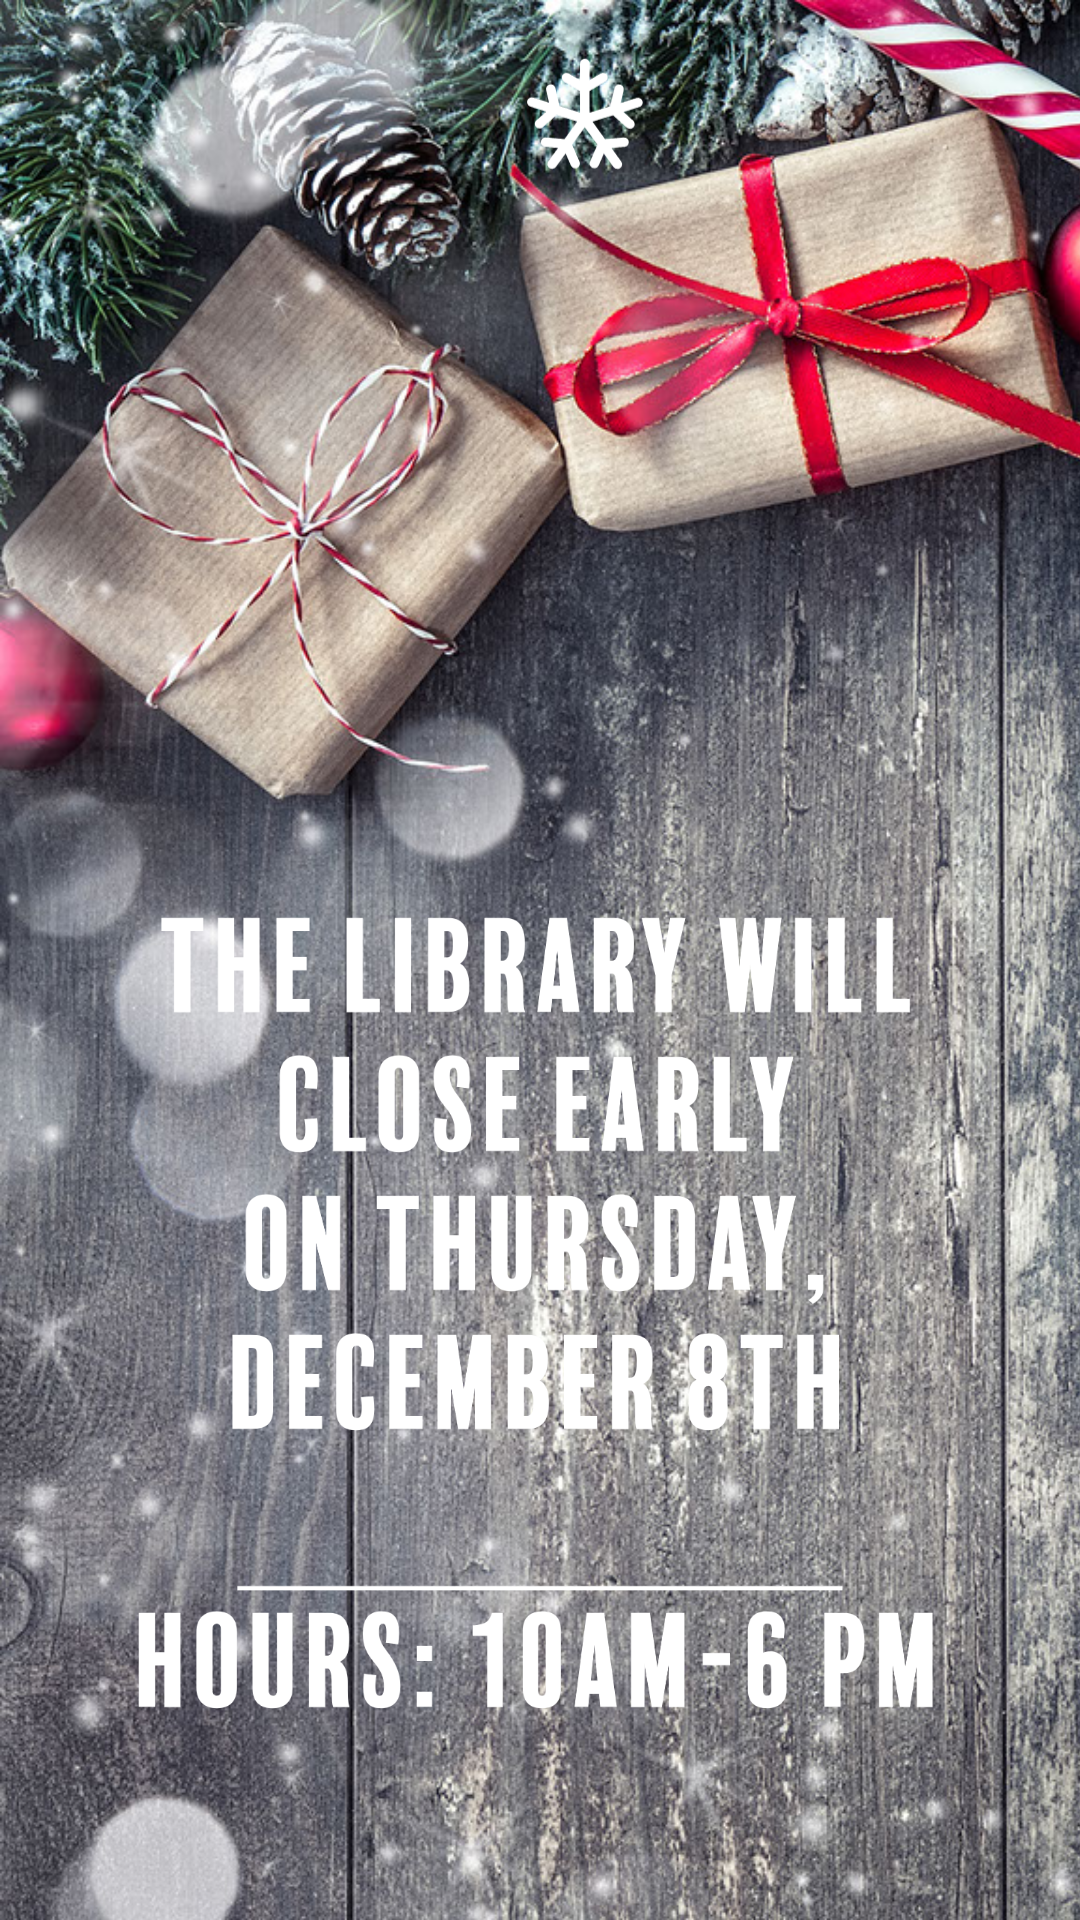 The library will close early on Thursday, December 8th. Hours: 10 am-6 pm